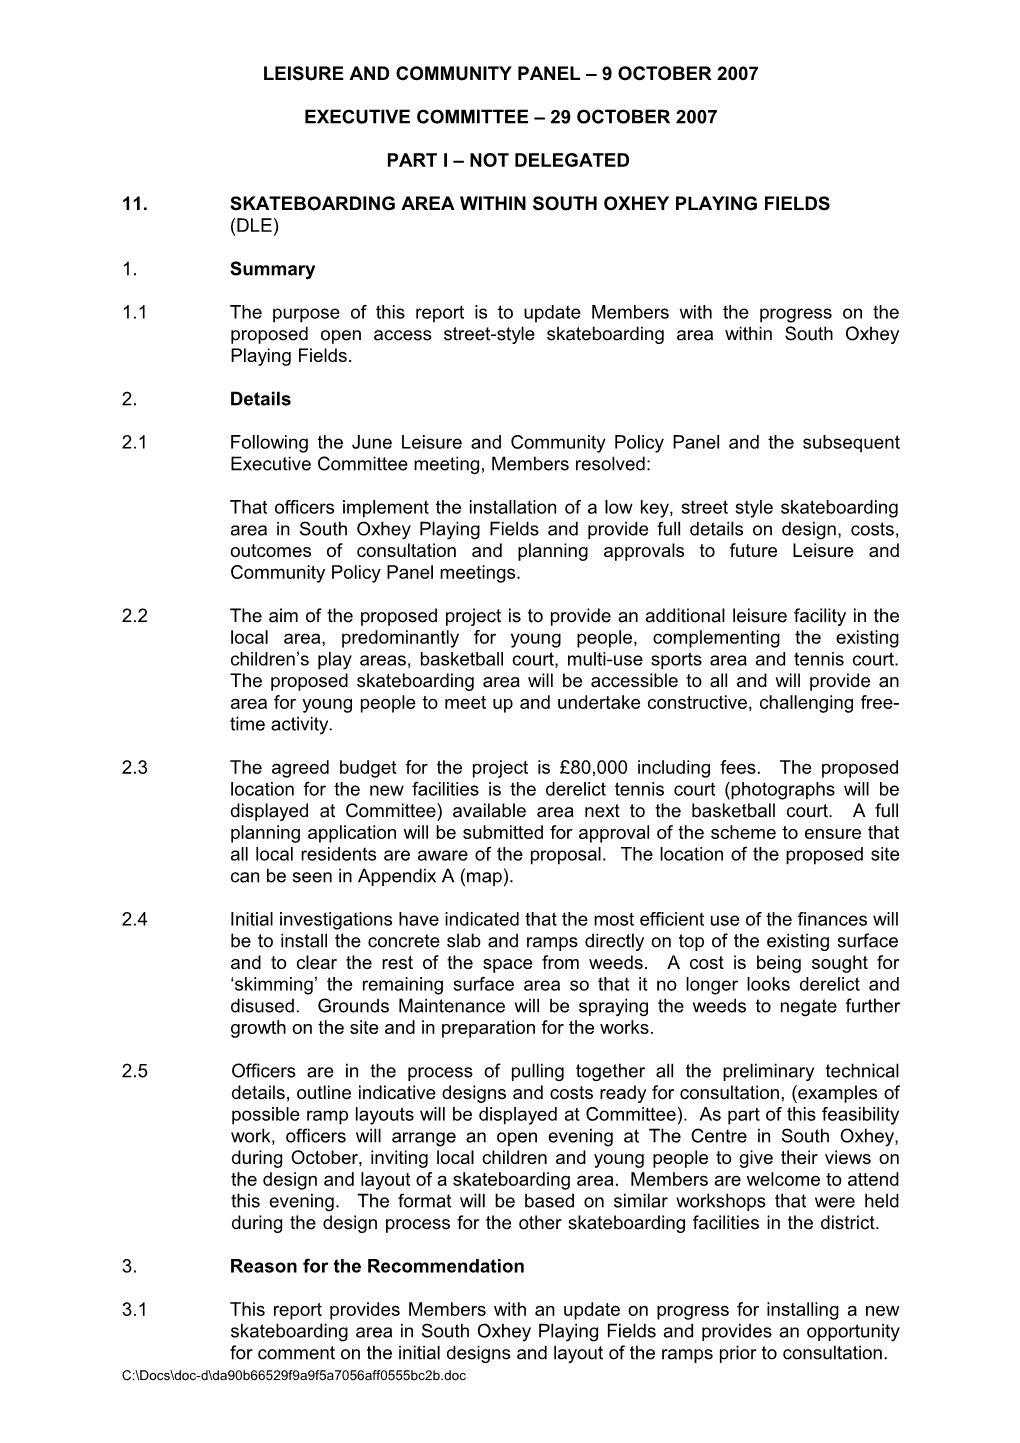 Report: Leisure & Comm PP 09.10.07: Part I - ( ) South Oxhey Skate Park